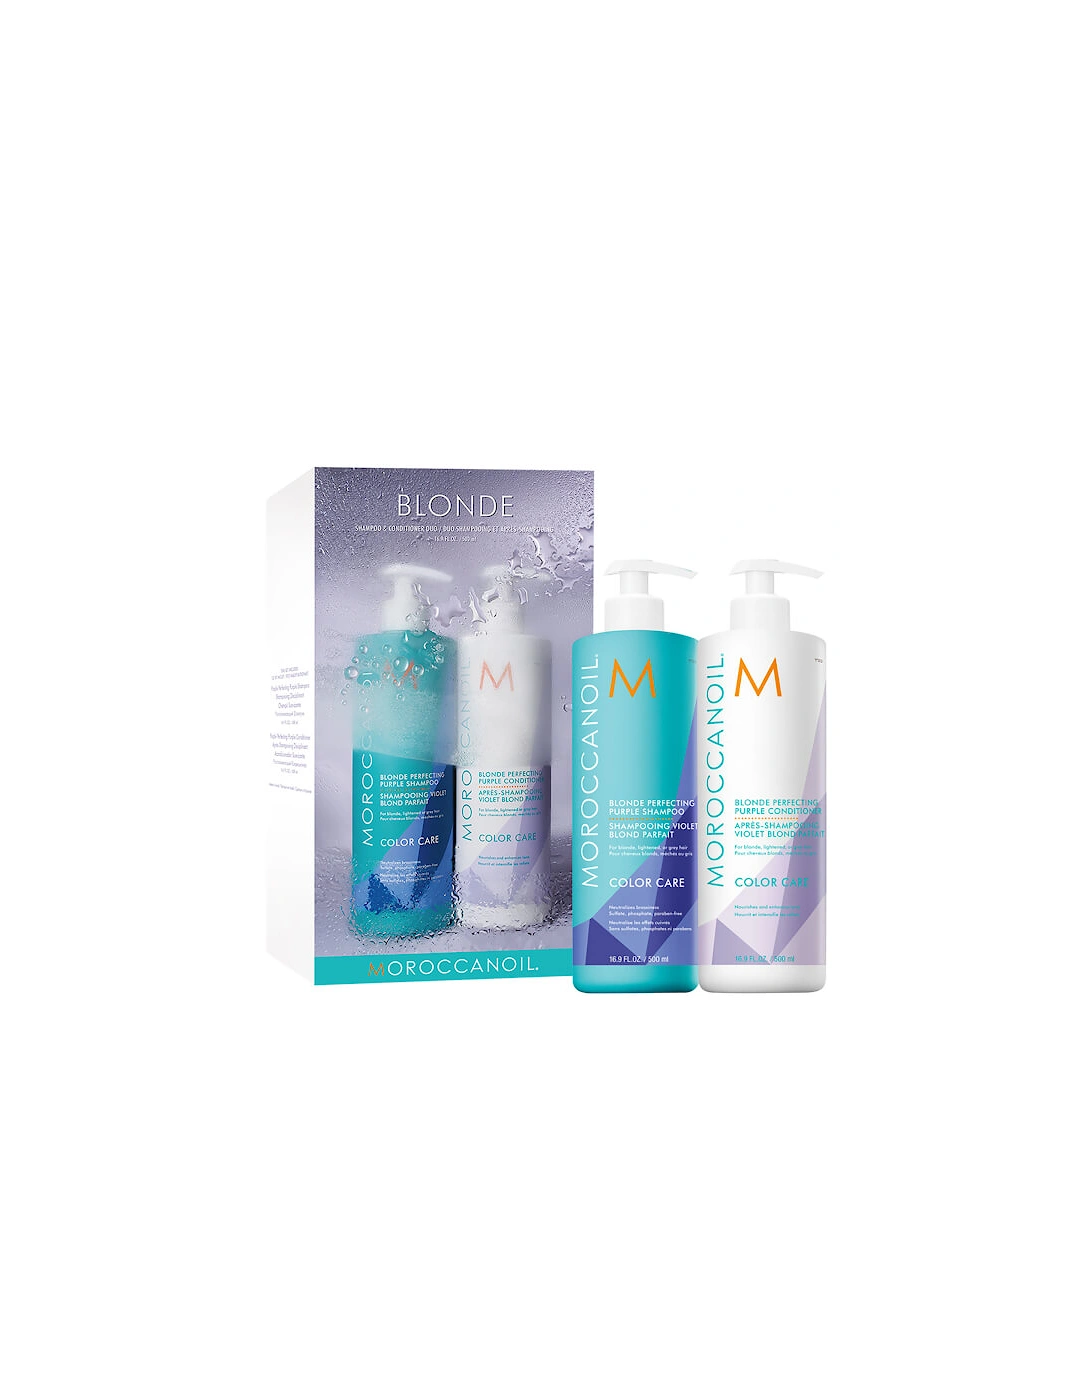 Moroccanoil Blonde Shampoo and Conditioner 500ml Duo (Worth £99.75), 2 of 1